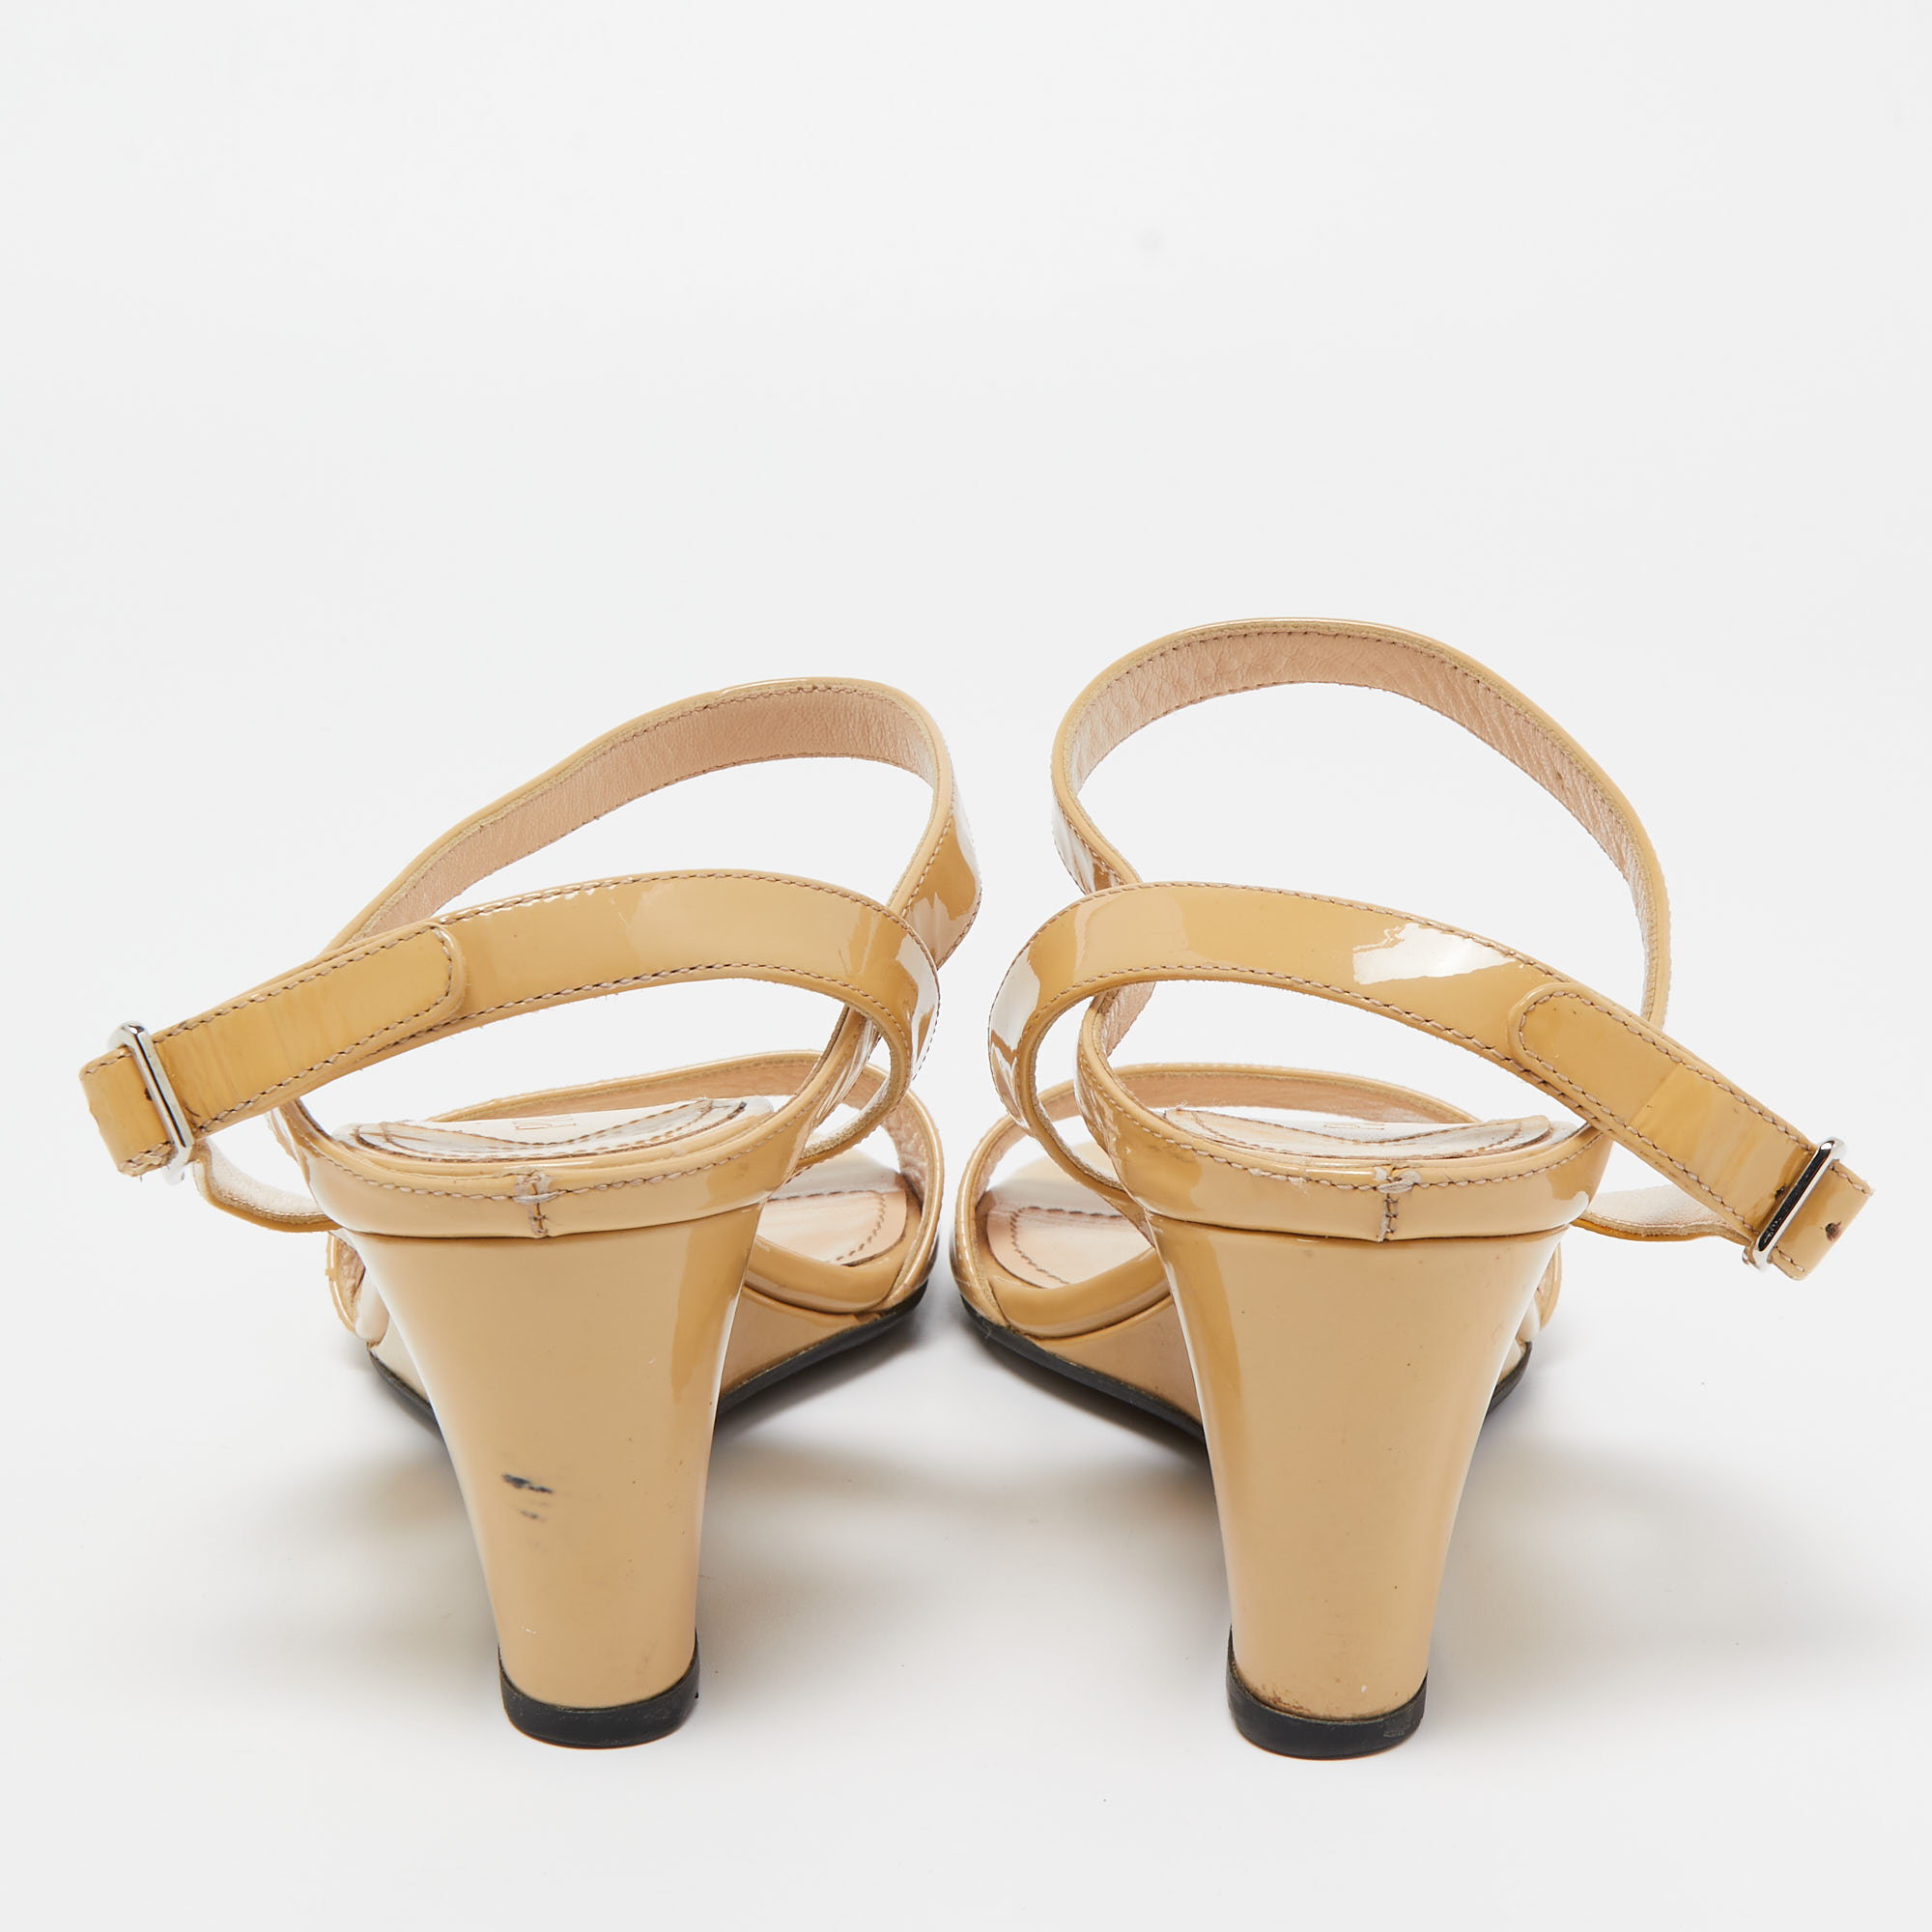 Prada Beige Patent Leather Wedge Ankle Strap Sandals Size 37.5